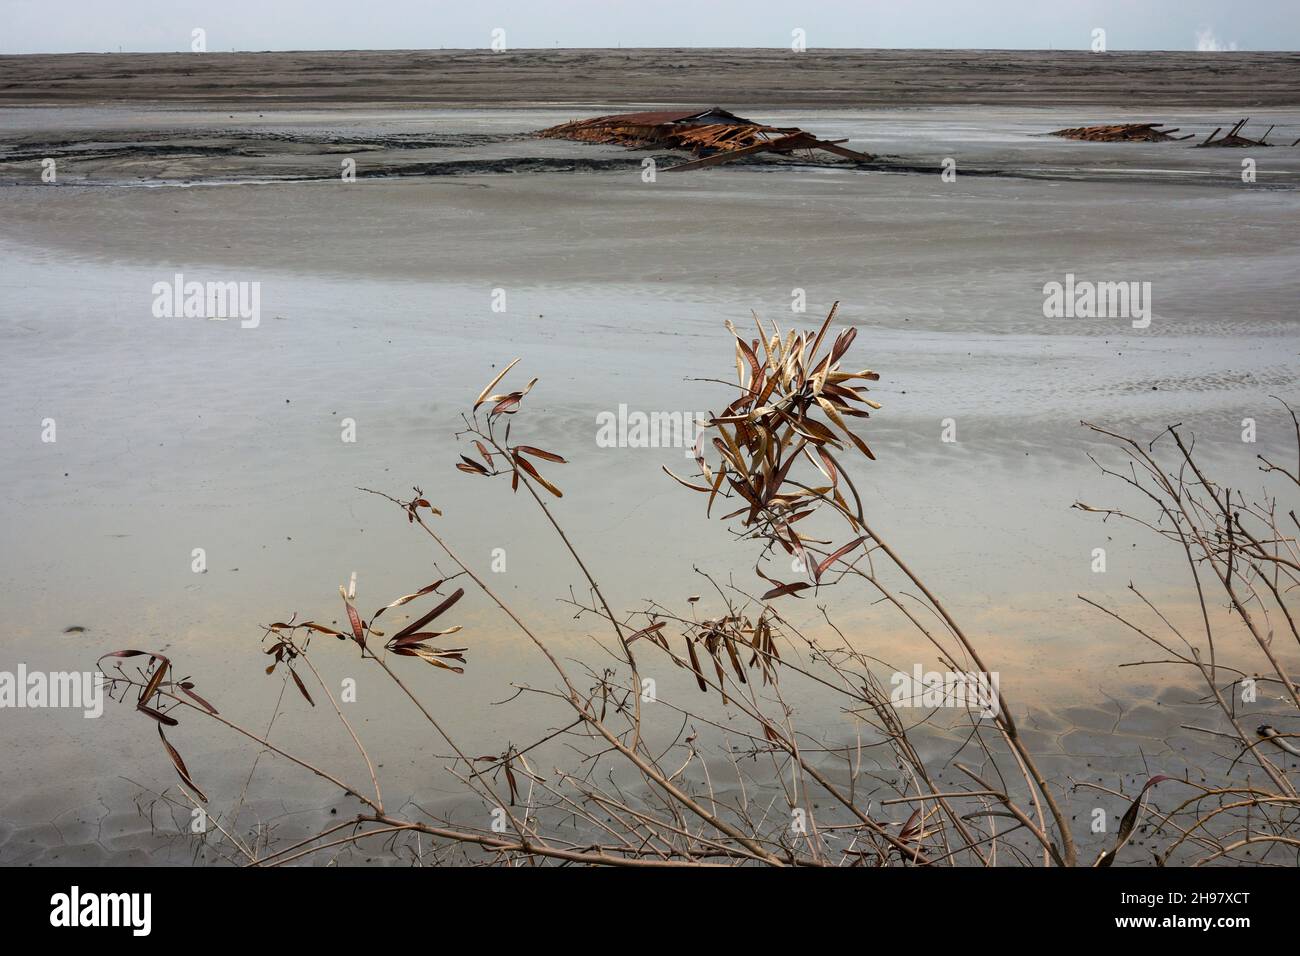 Lake of dry mud formed from mud volcano eruption with dead plant in foreground in Sidoarjo, Indonesia. Natural disaster in oil and gas industry. Stock Photo